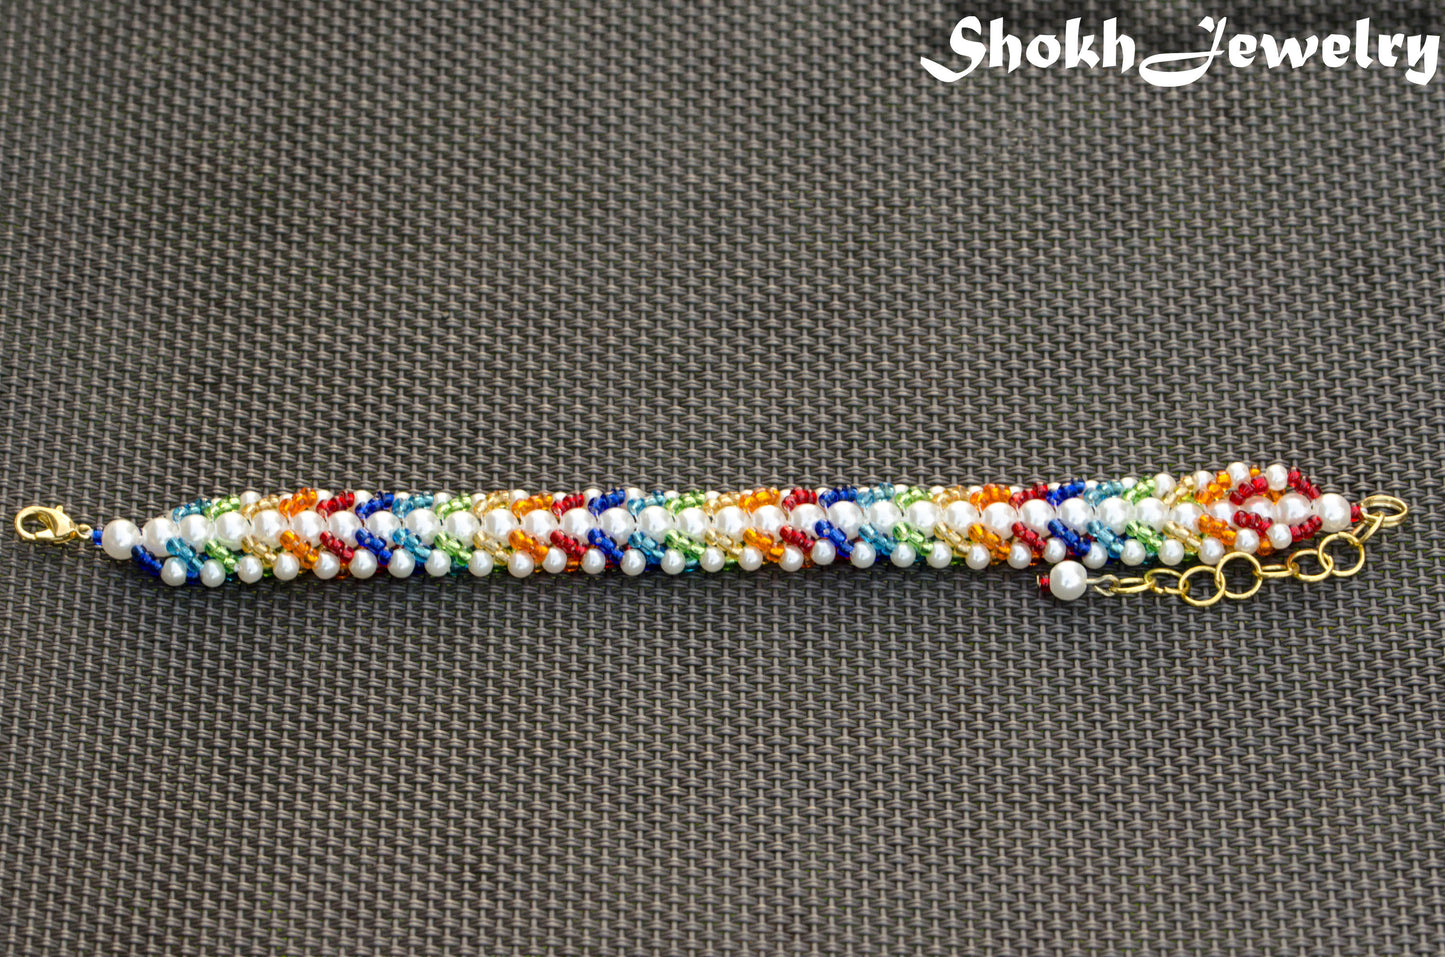 Top view of Rainbow seed bead and pearl woven bracelet.